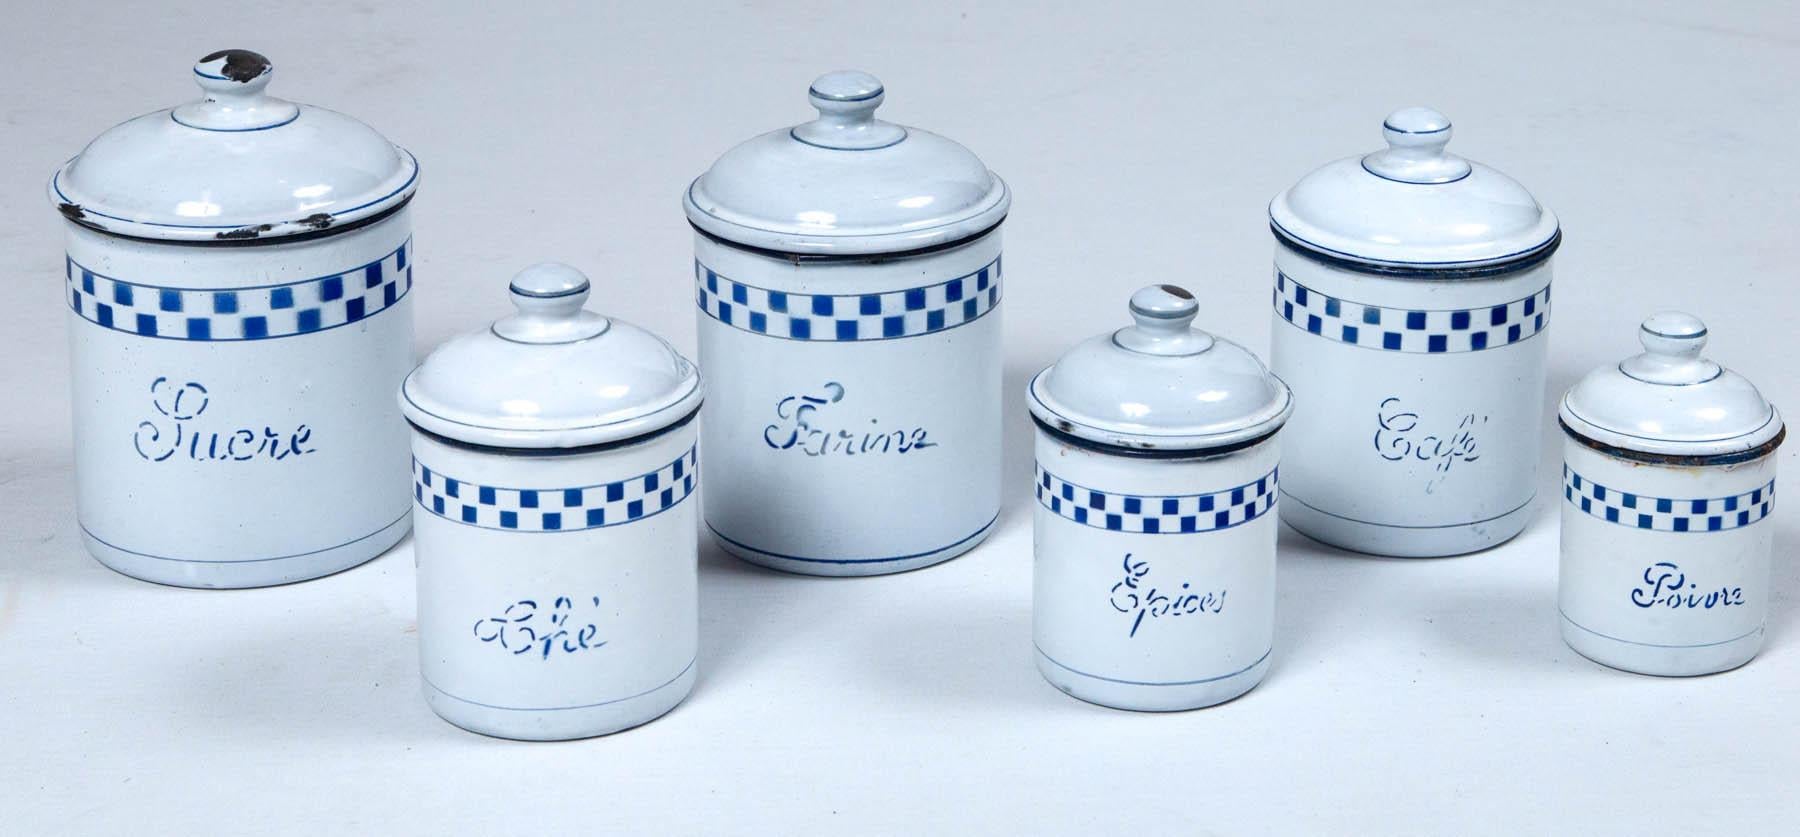 French enamelware cannister set, circa 1920. Set of six, with graphic blue and white checkerboard design on white ground.